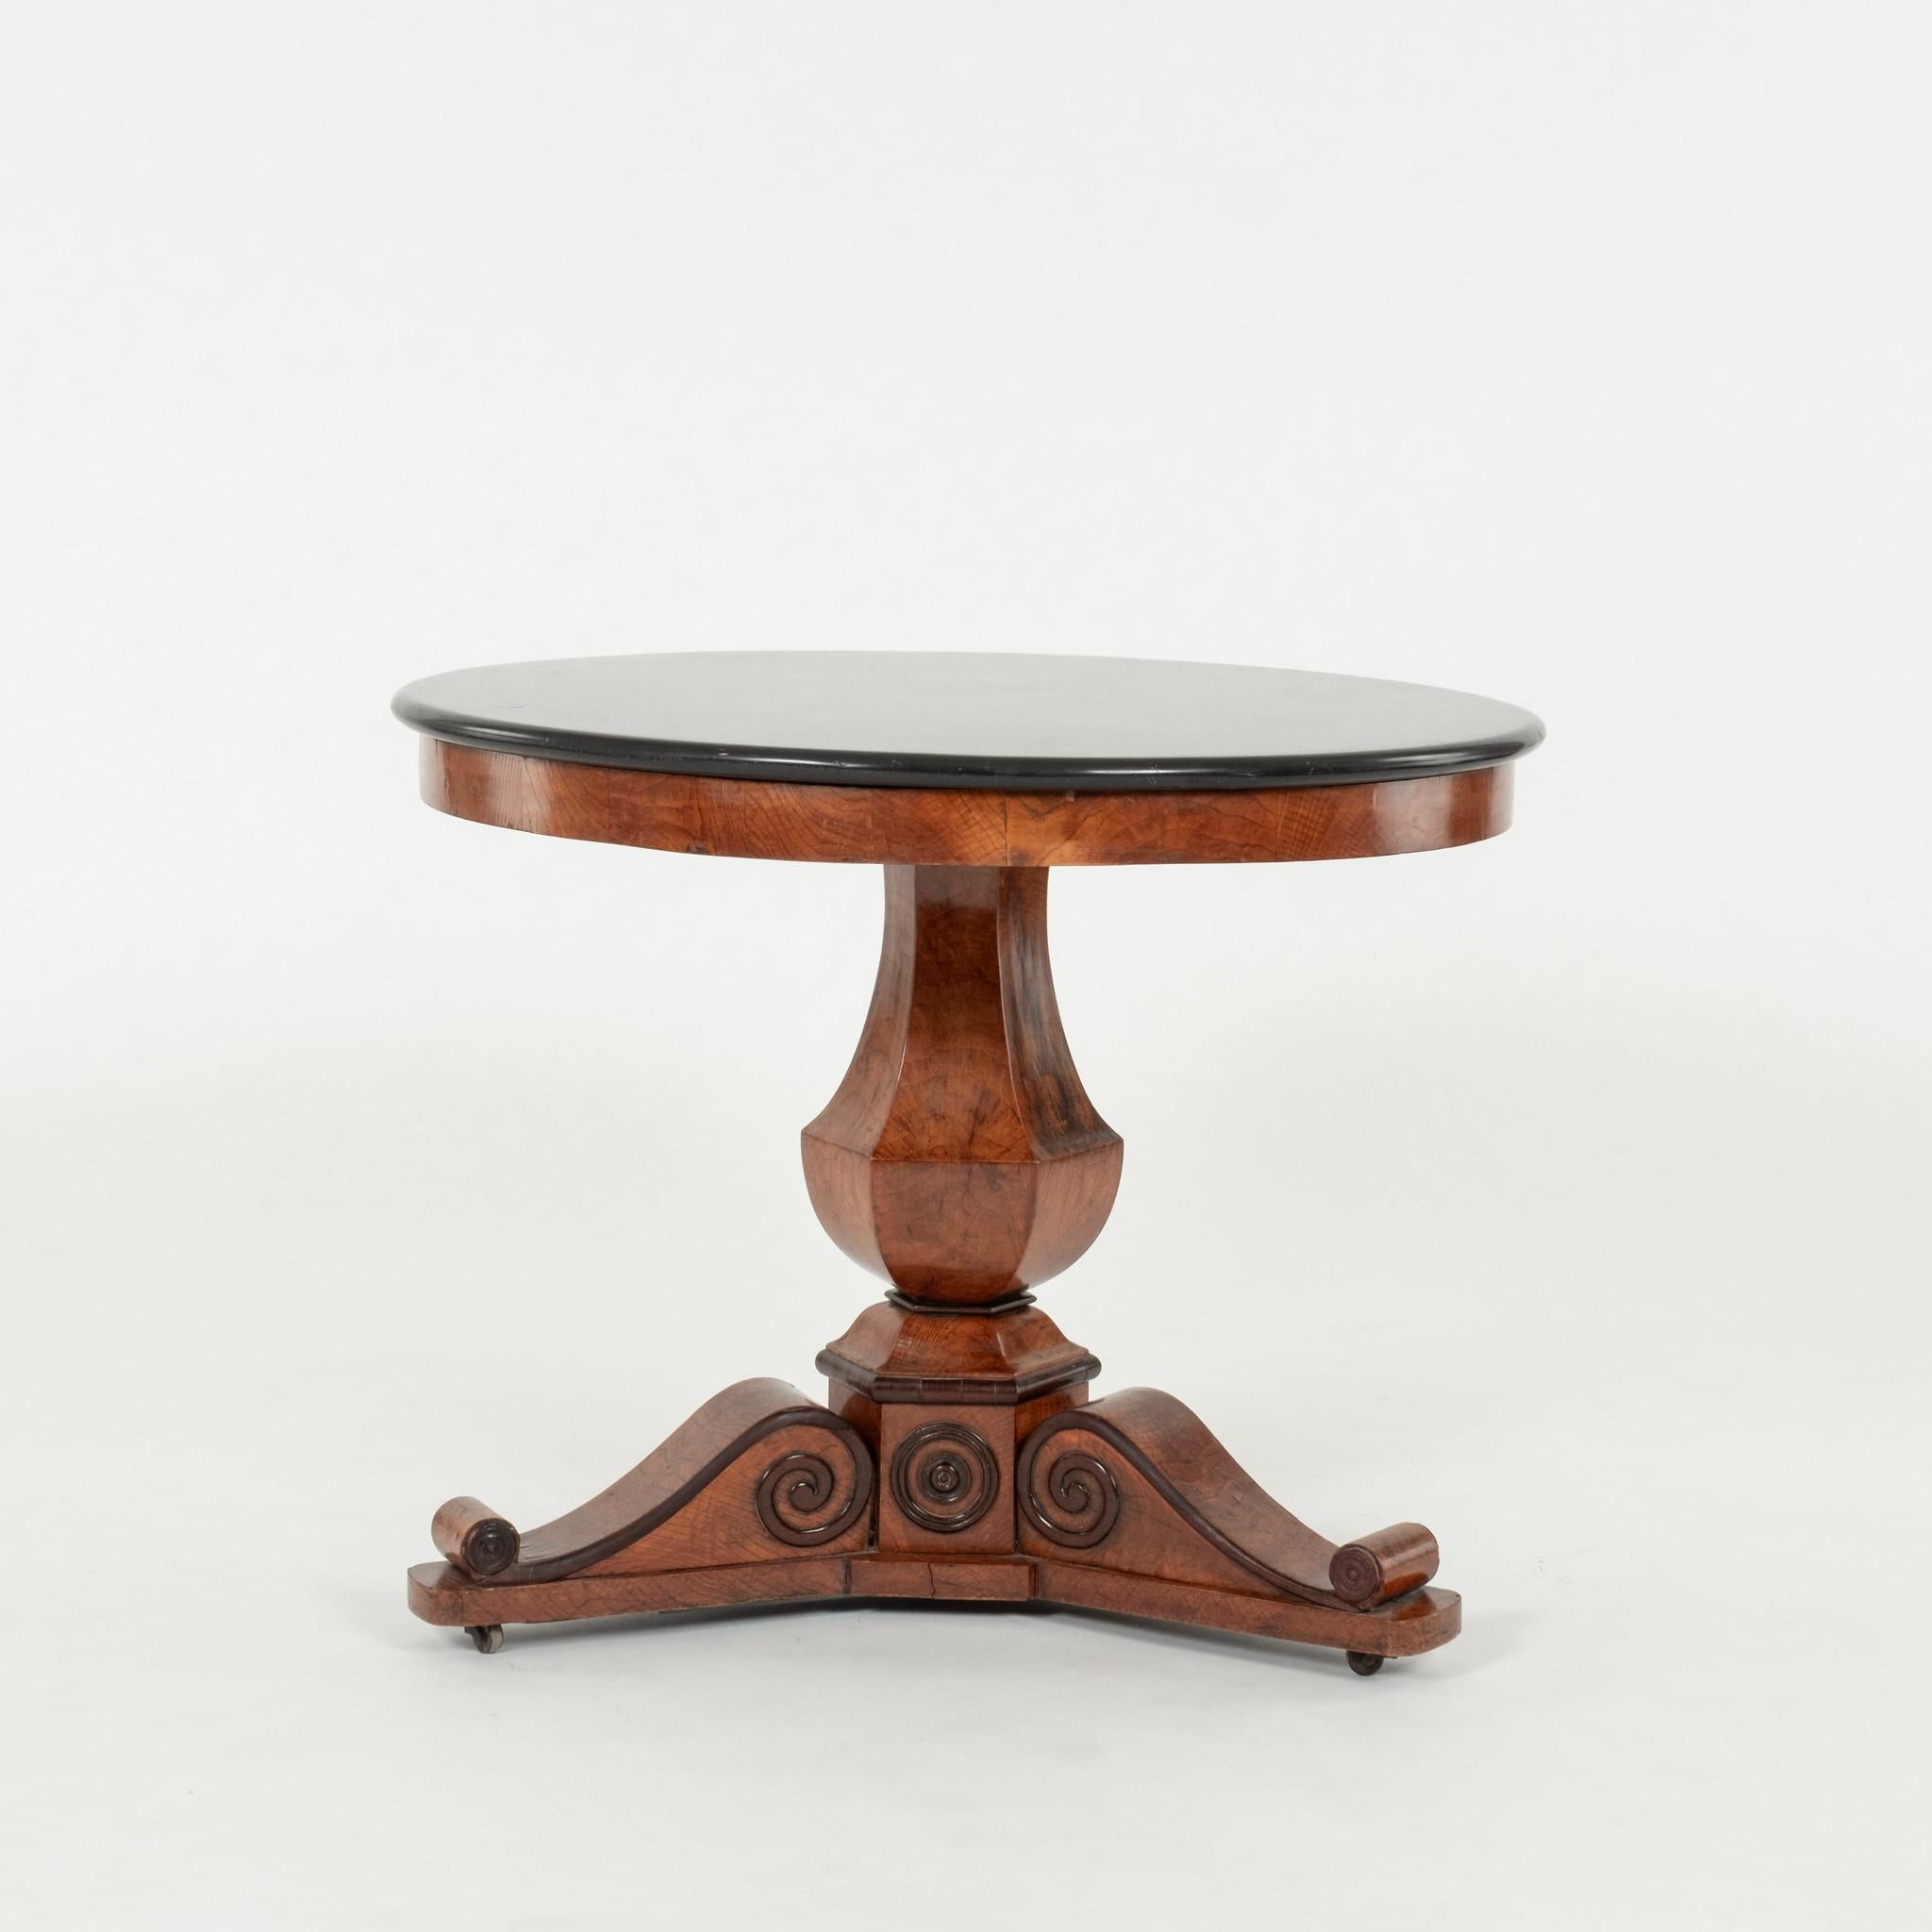 A handsome period Charles X center table with black marble top over pedestal base on casters.